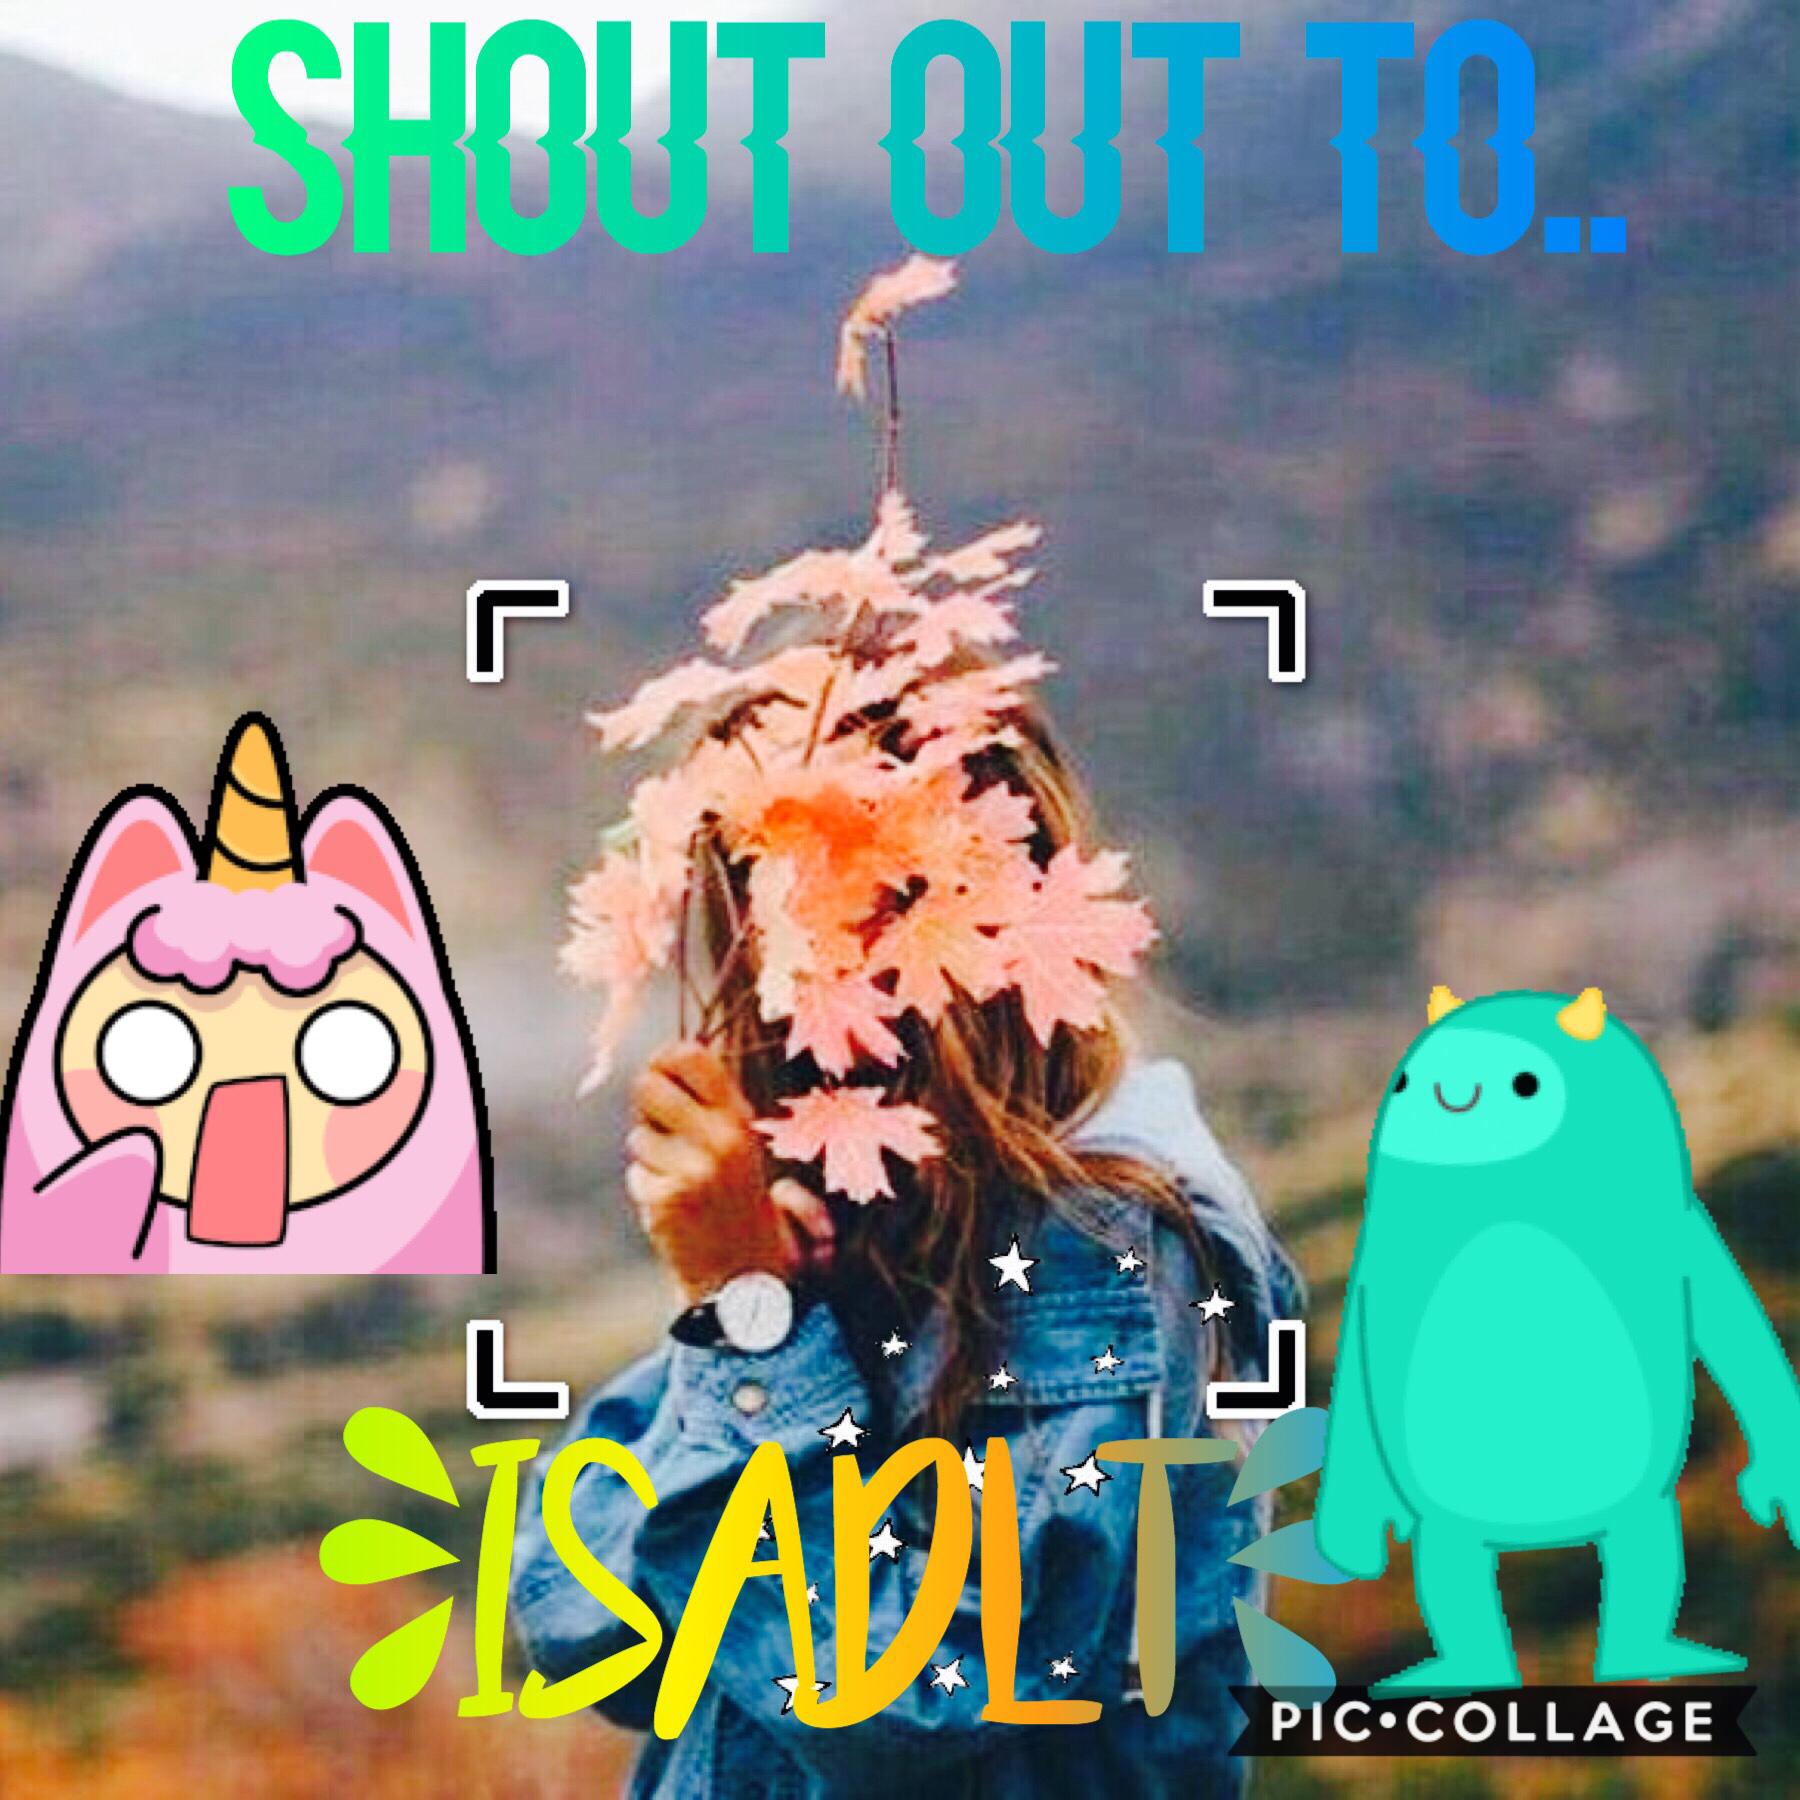 Shout Out to.... Isadlt!!!!💖💖